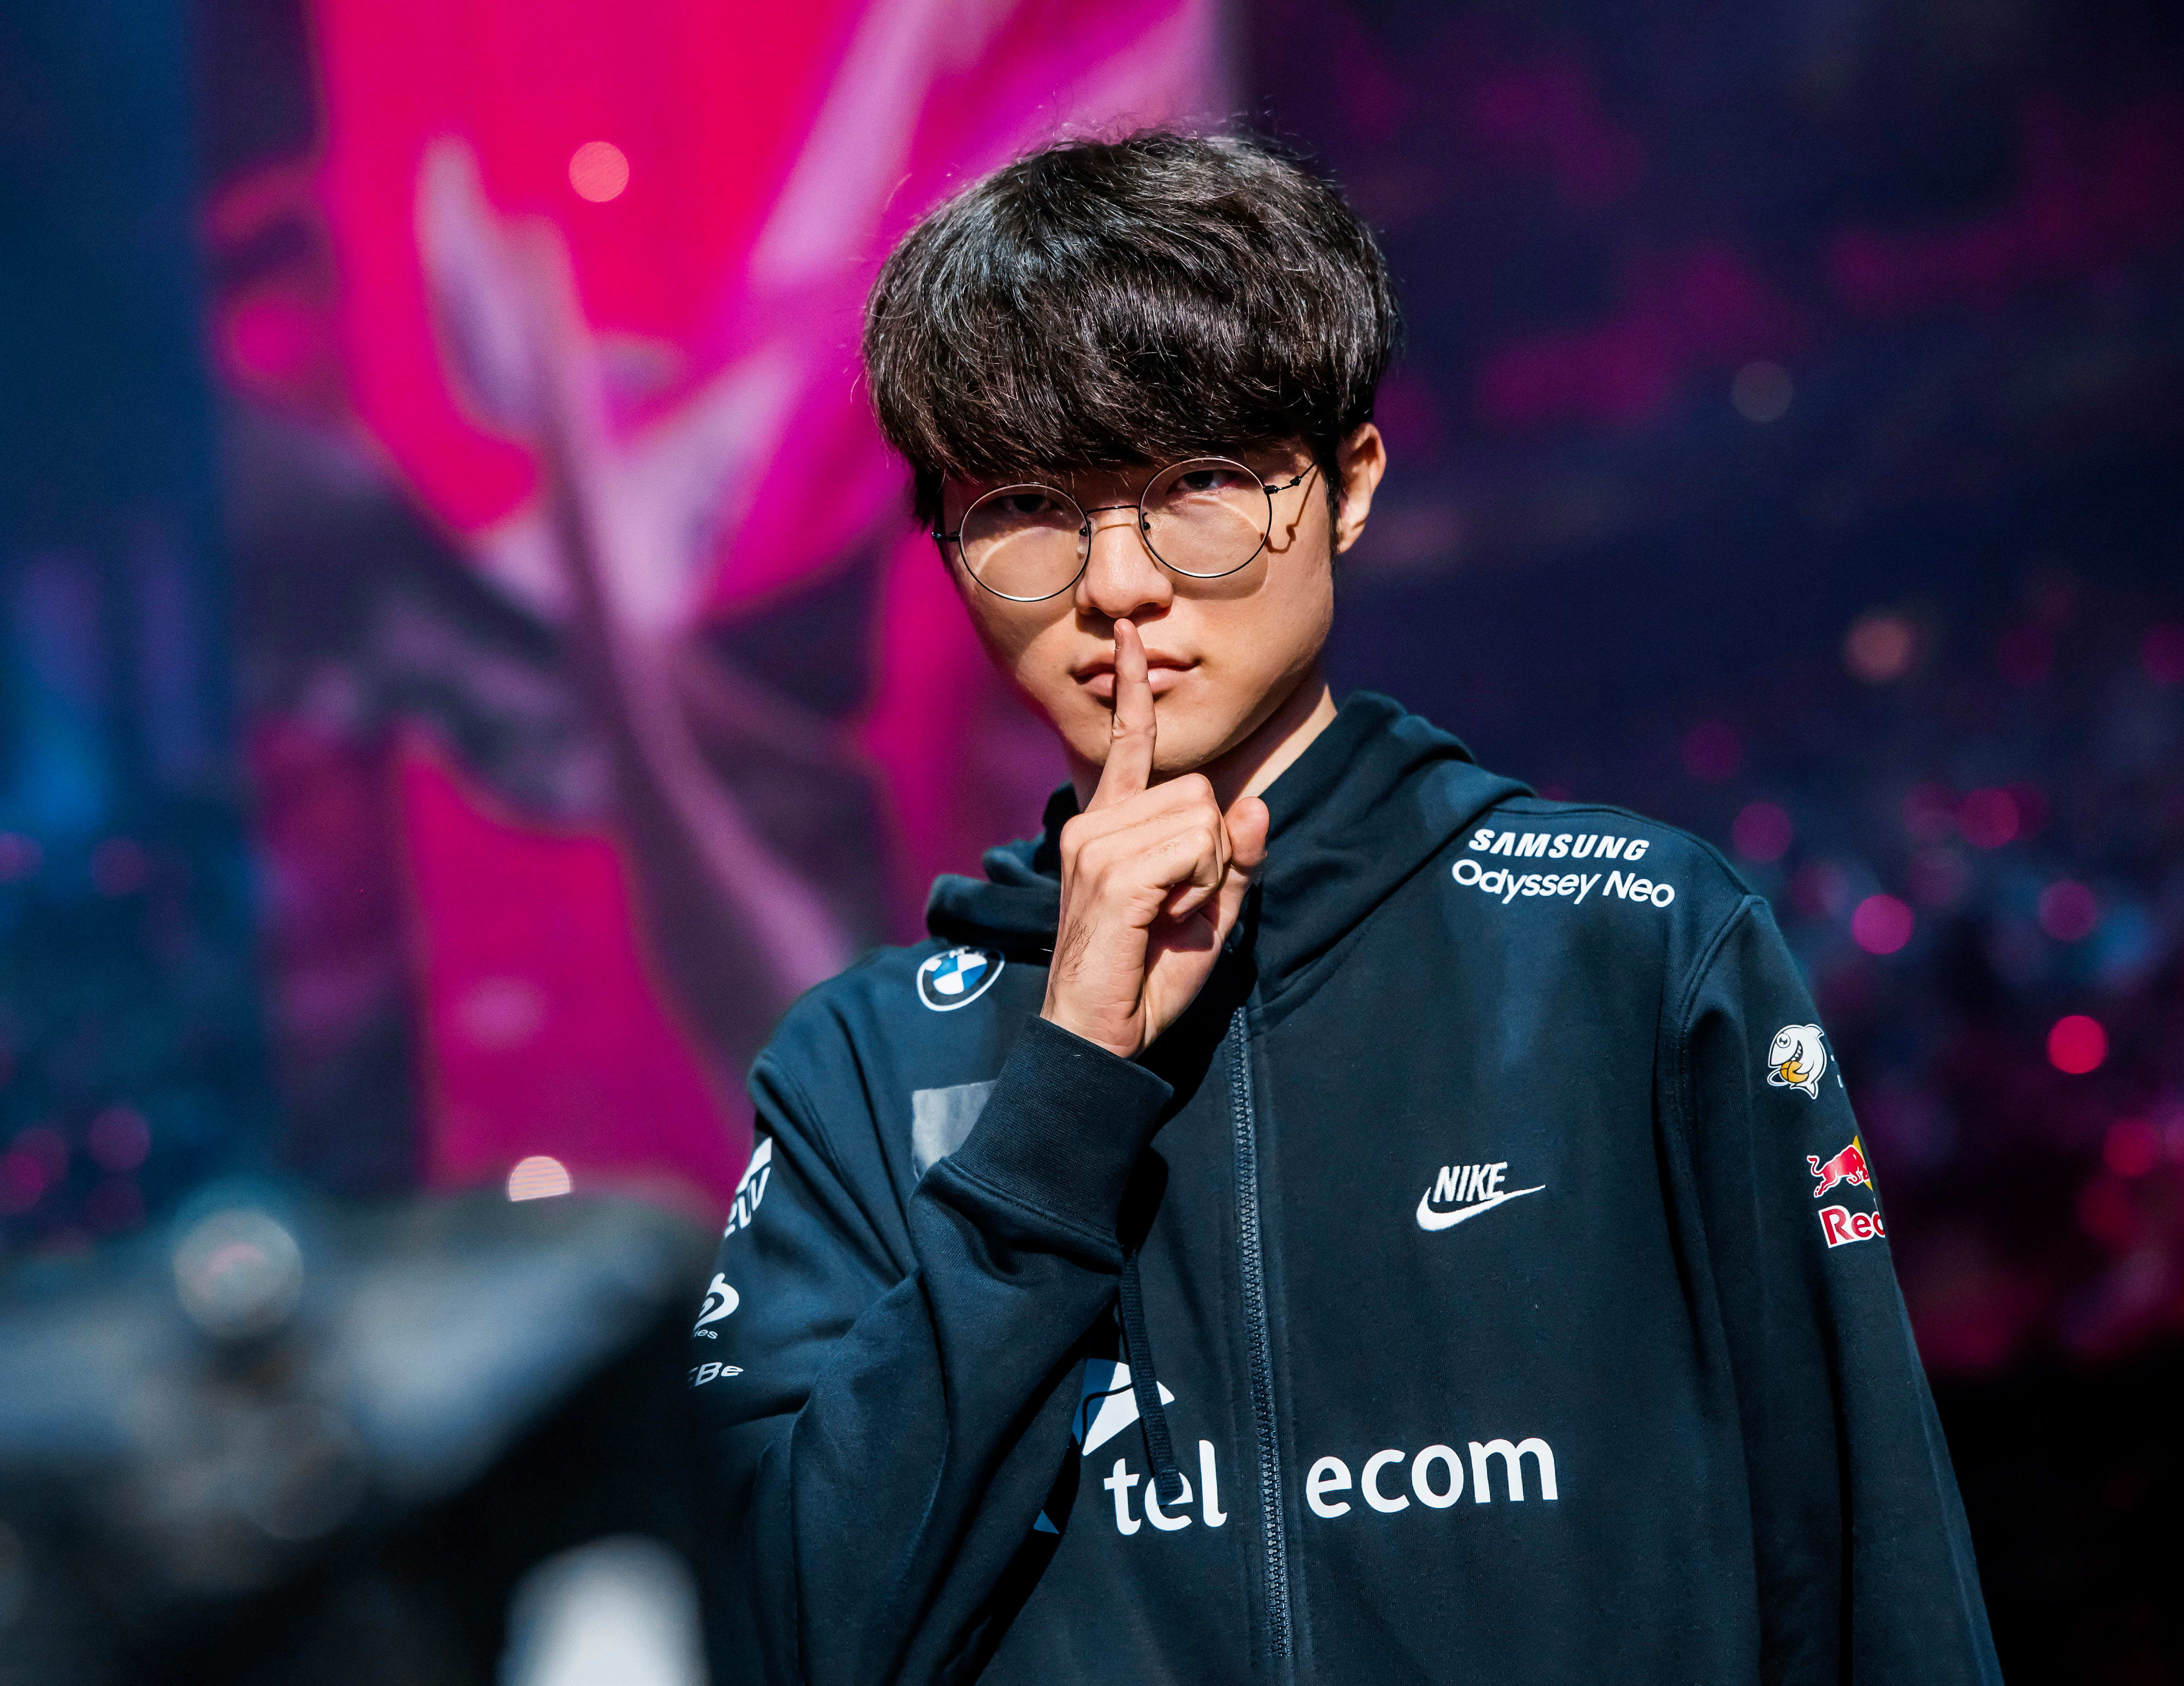 Faker and Deft on SKE2023, share their thoughts on Worlds in Korea, and  goals for 2023 - Inven Global